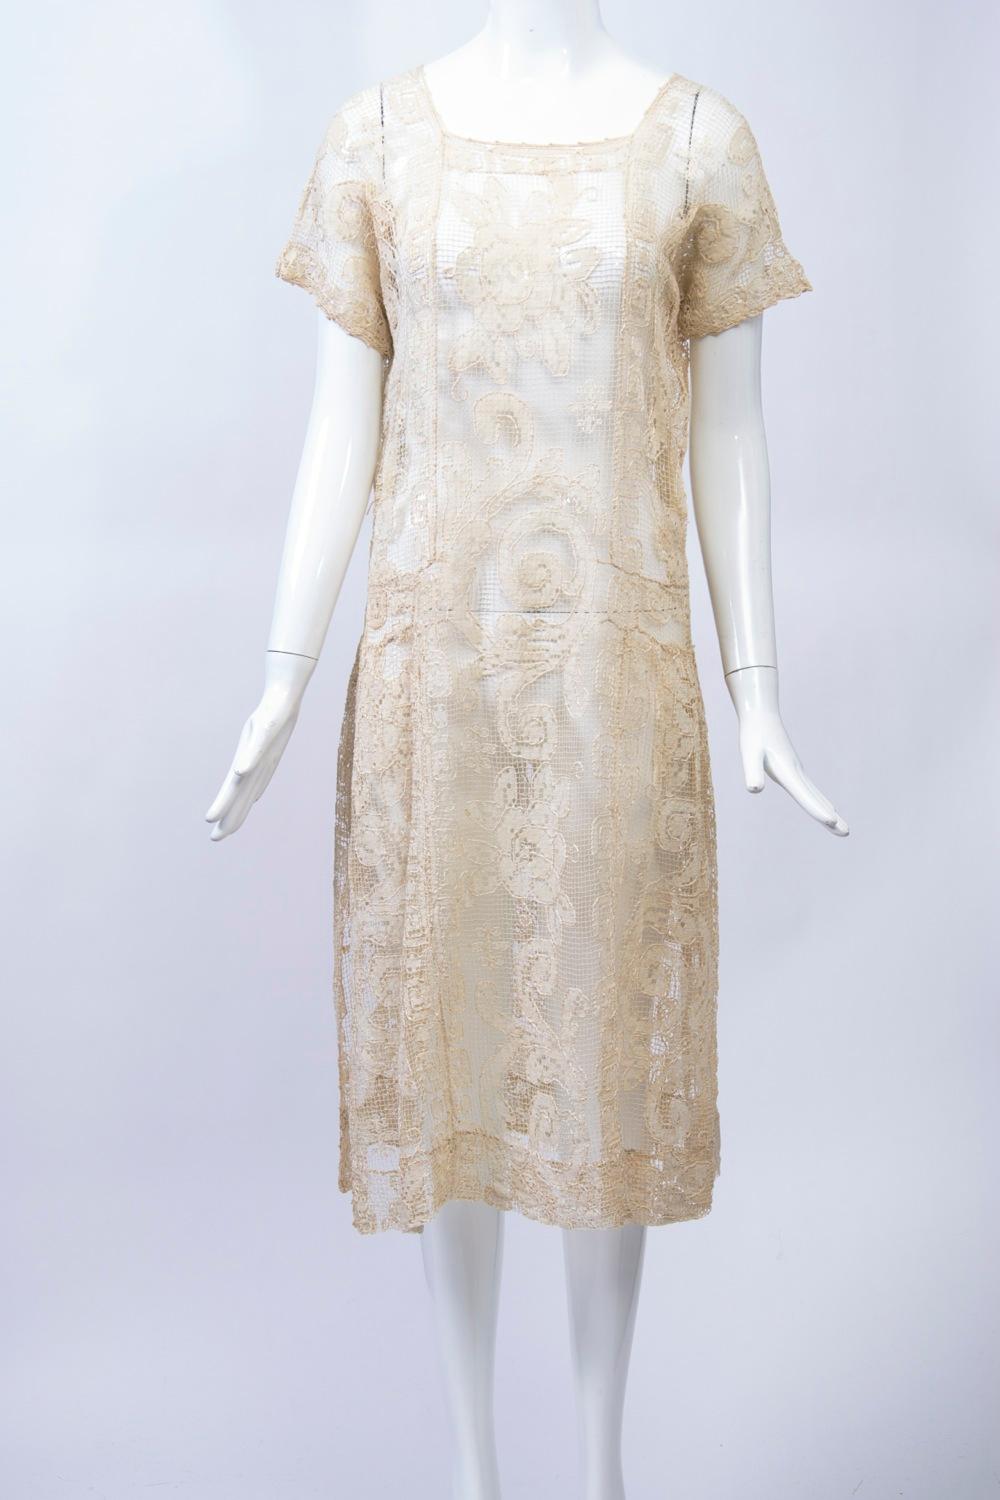 1930s beige lace dress featuring a square neckline, short sleeves, and a dropped waistline with slight shirring at the sides, where there are slits at the hem; the front and back panels extend straight from the neckline to the calf-length hem. Add a